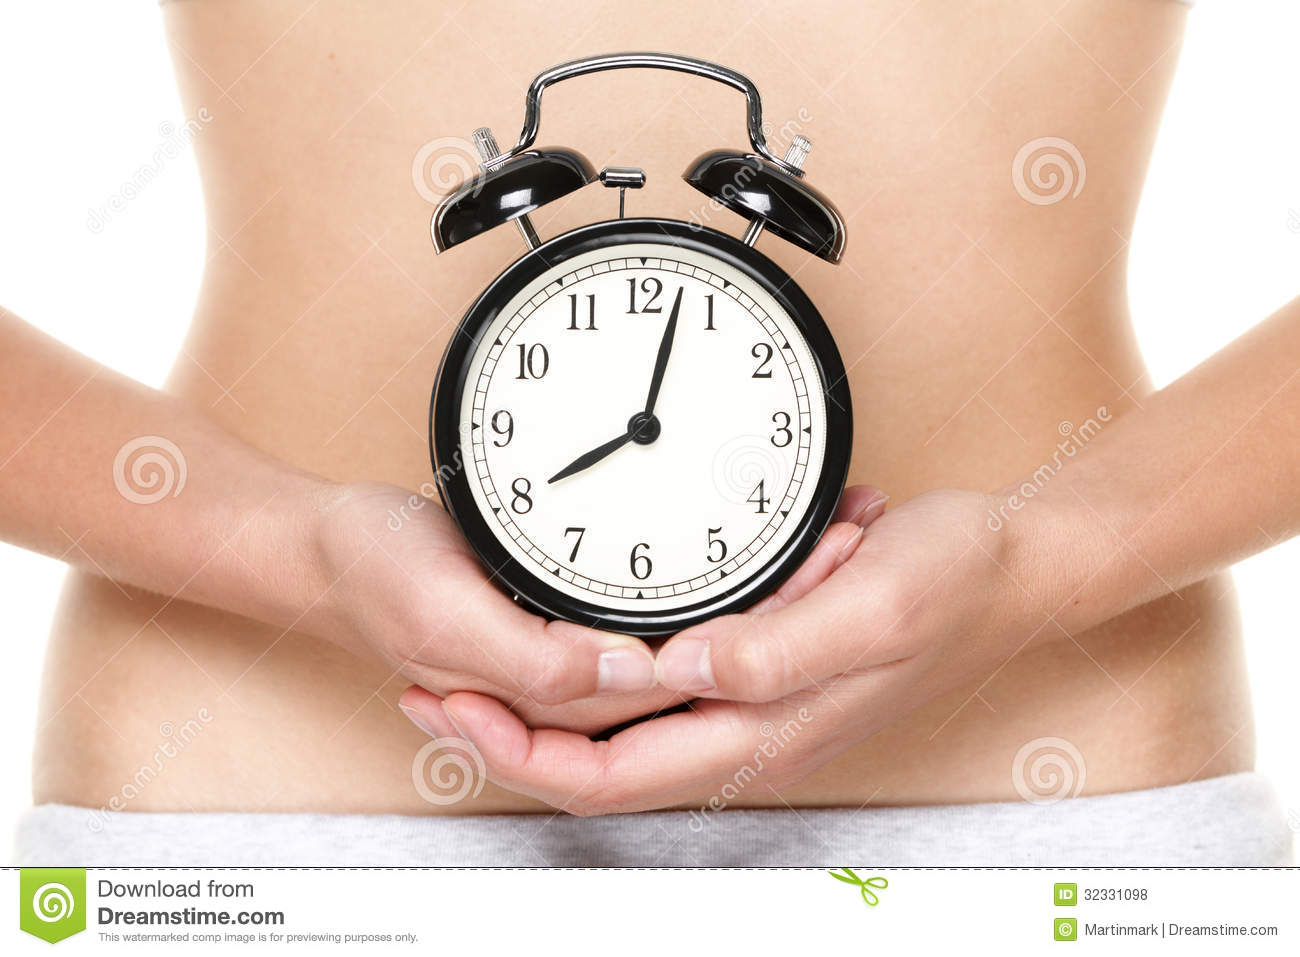 biological-clock-ticking-woman-holding-watch-front-stomach-pregnancy-concept-female-hands-32331098